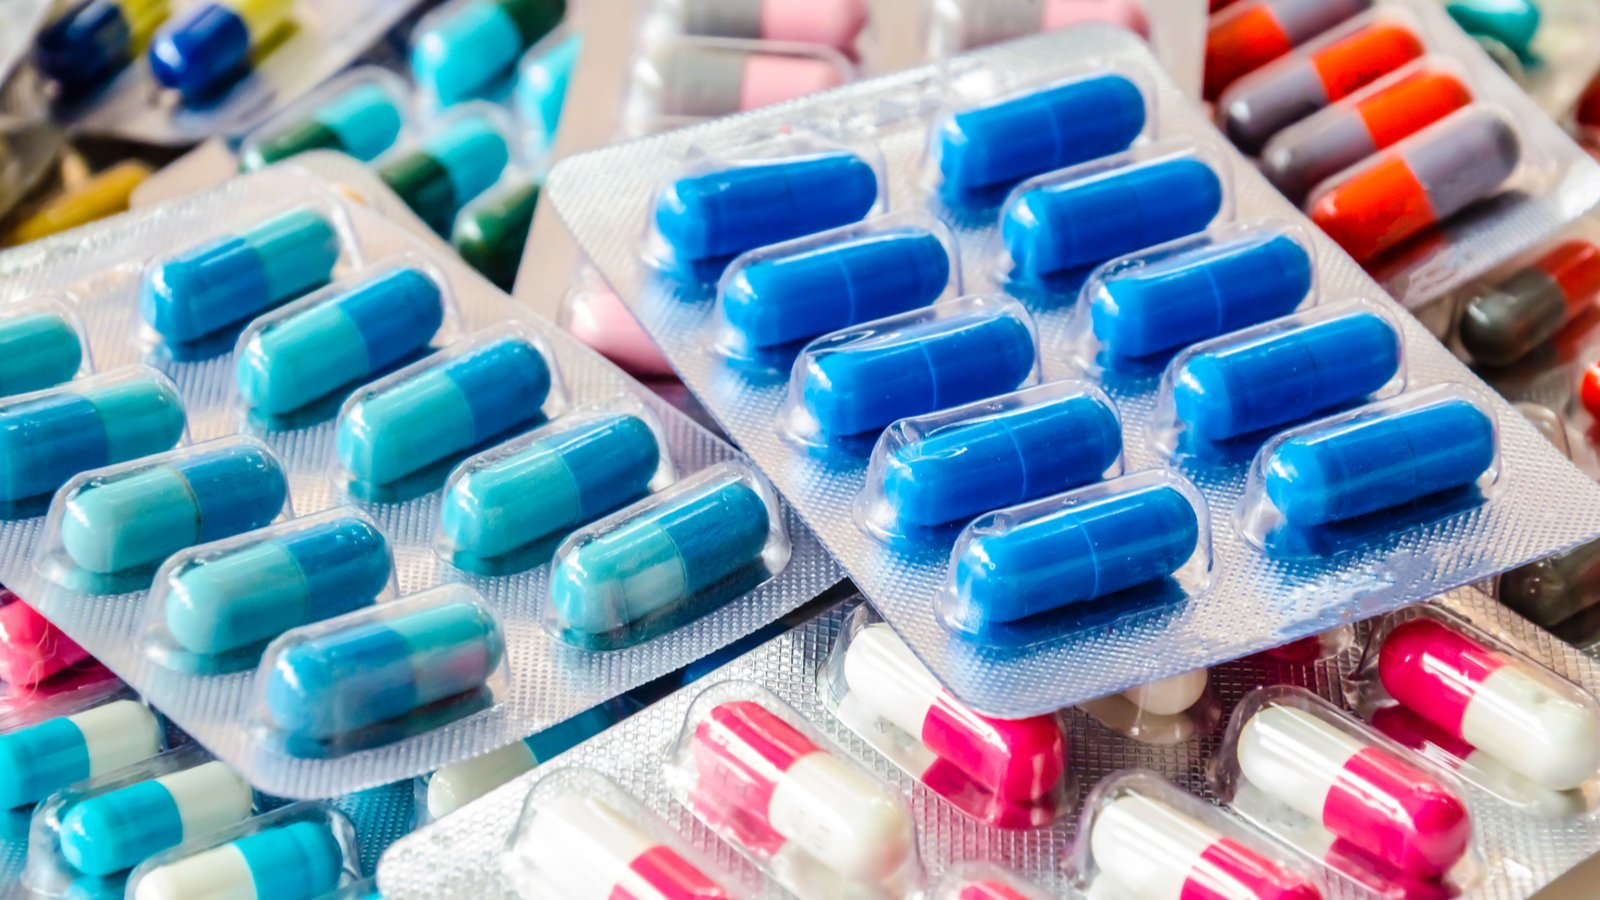 Packs of blue and pink pills are piled on top of each other representing CTLT stock.